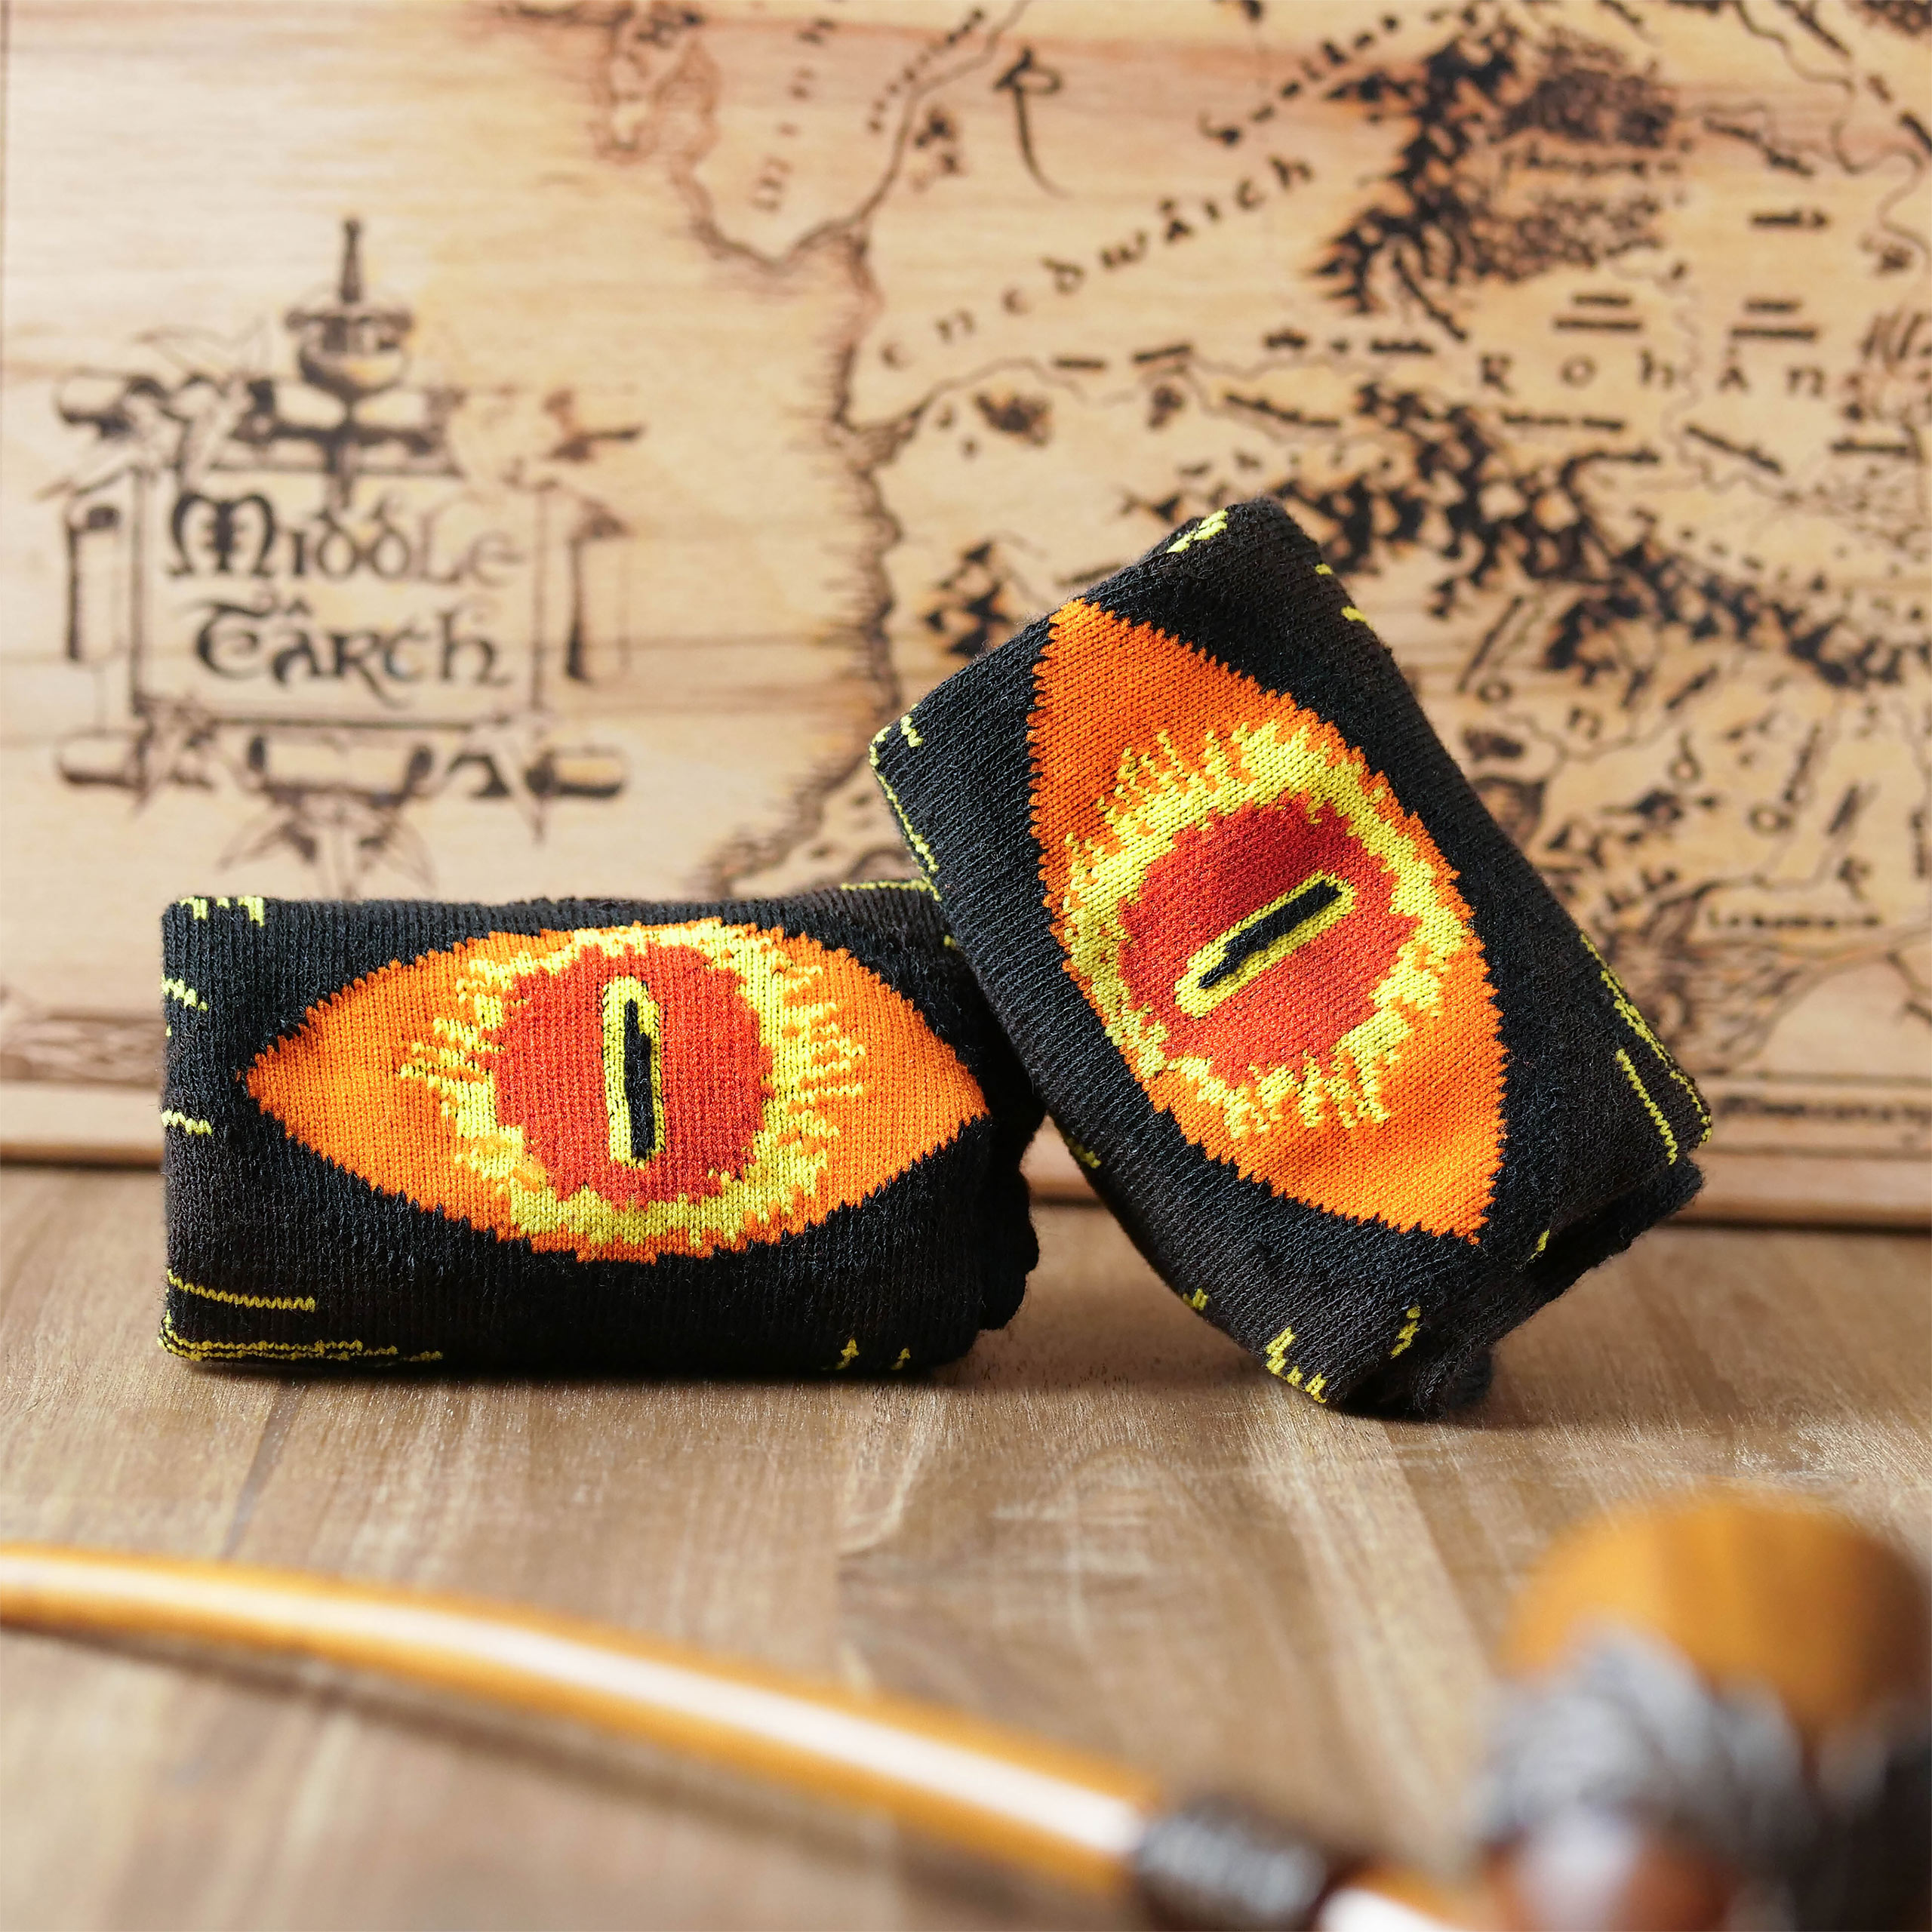 Lord of the Rings - Eye of Sauron Socks